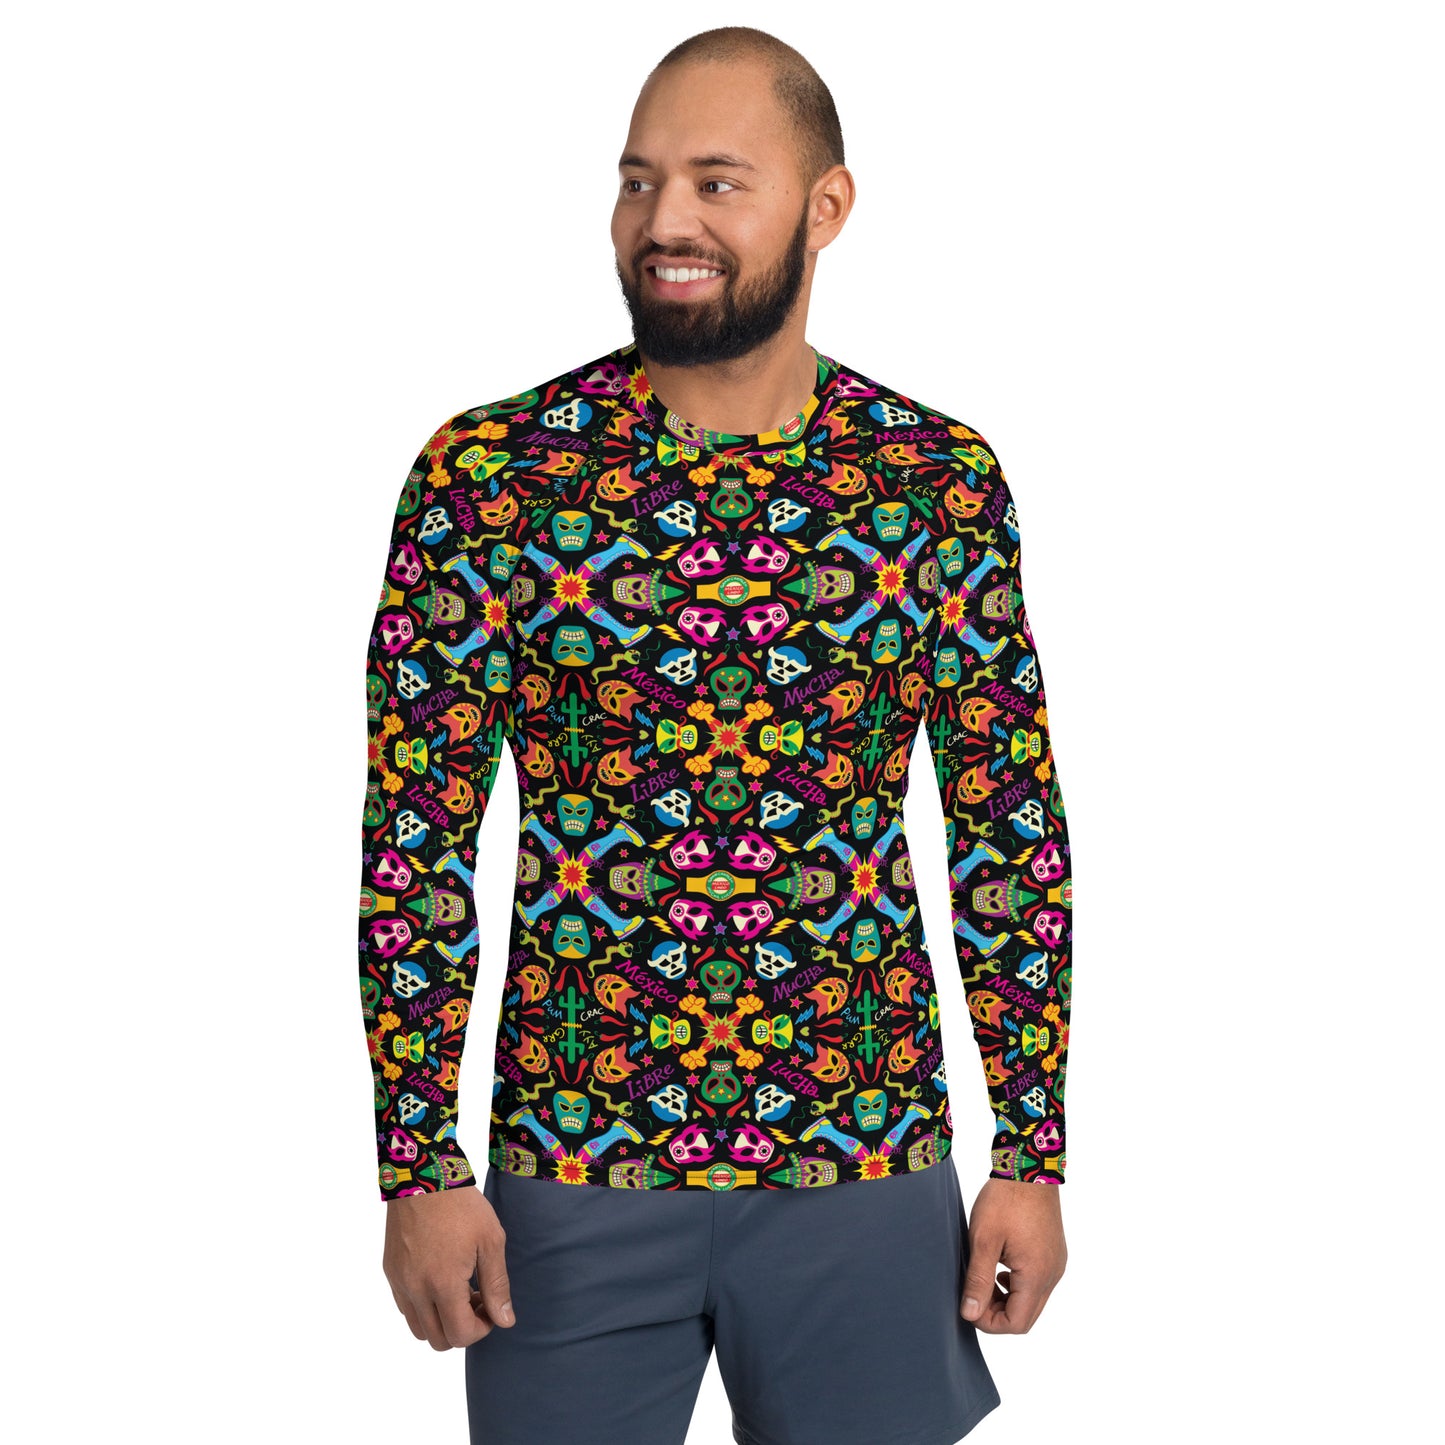 Mexican wrestling colorful party Men's Rash Guard. Smiling man wearing All-over print Rash guard by Zoo&co